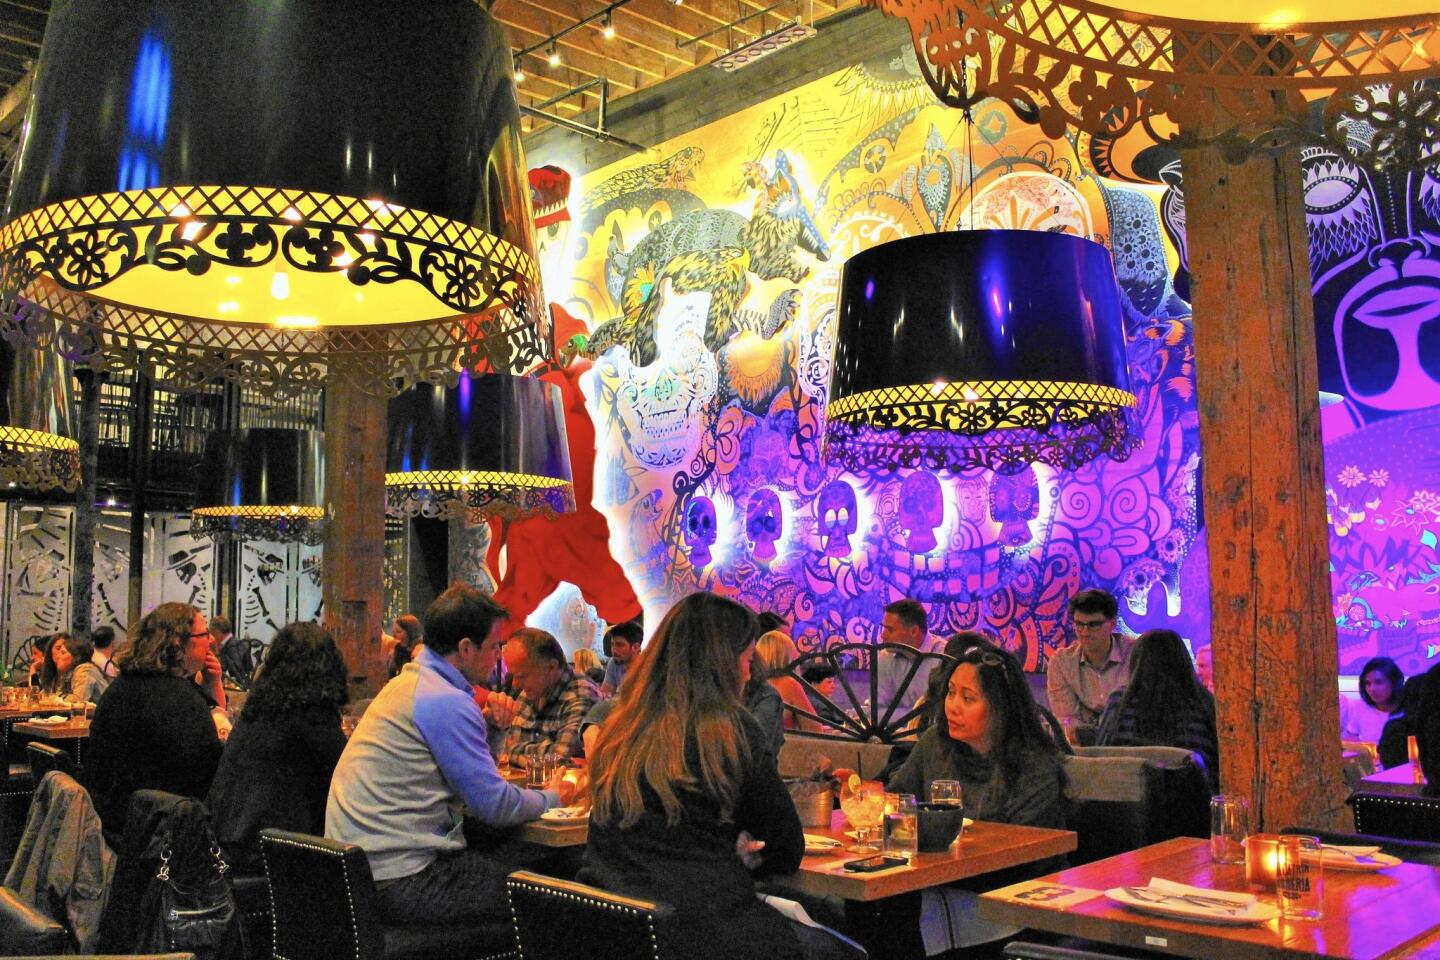 A dazzling mural by Oscar Flores competes for attention with chef Olivier Le Calvez's modern Mexican cuisine at El Catrin.